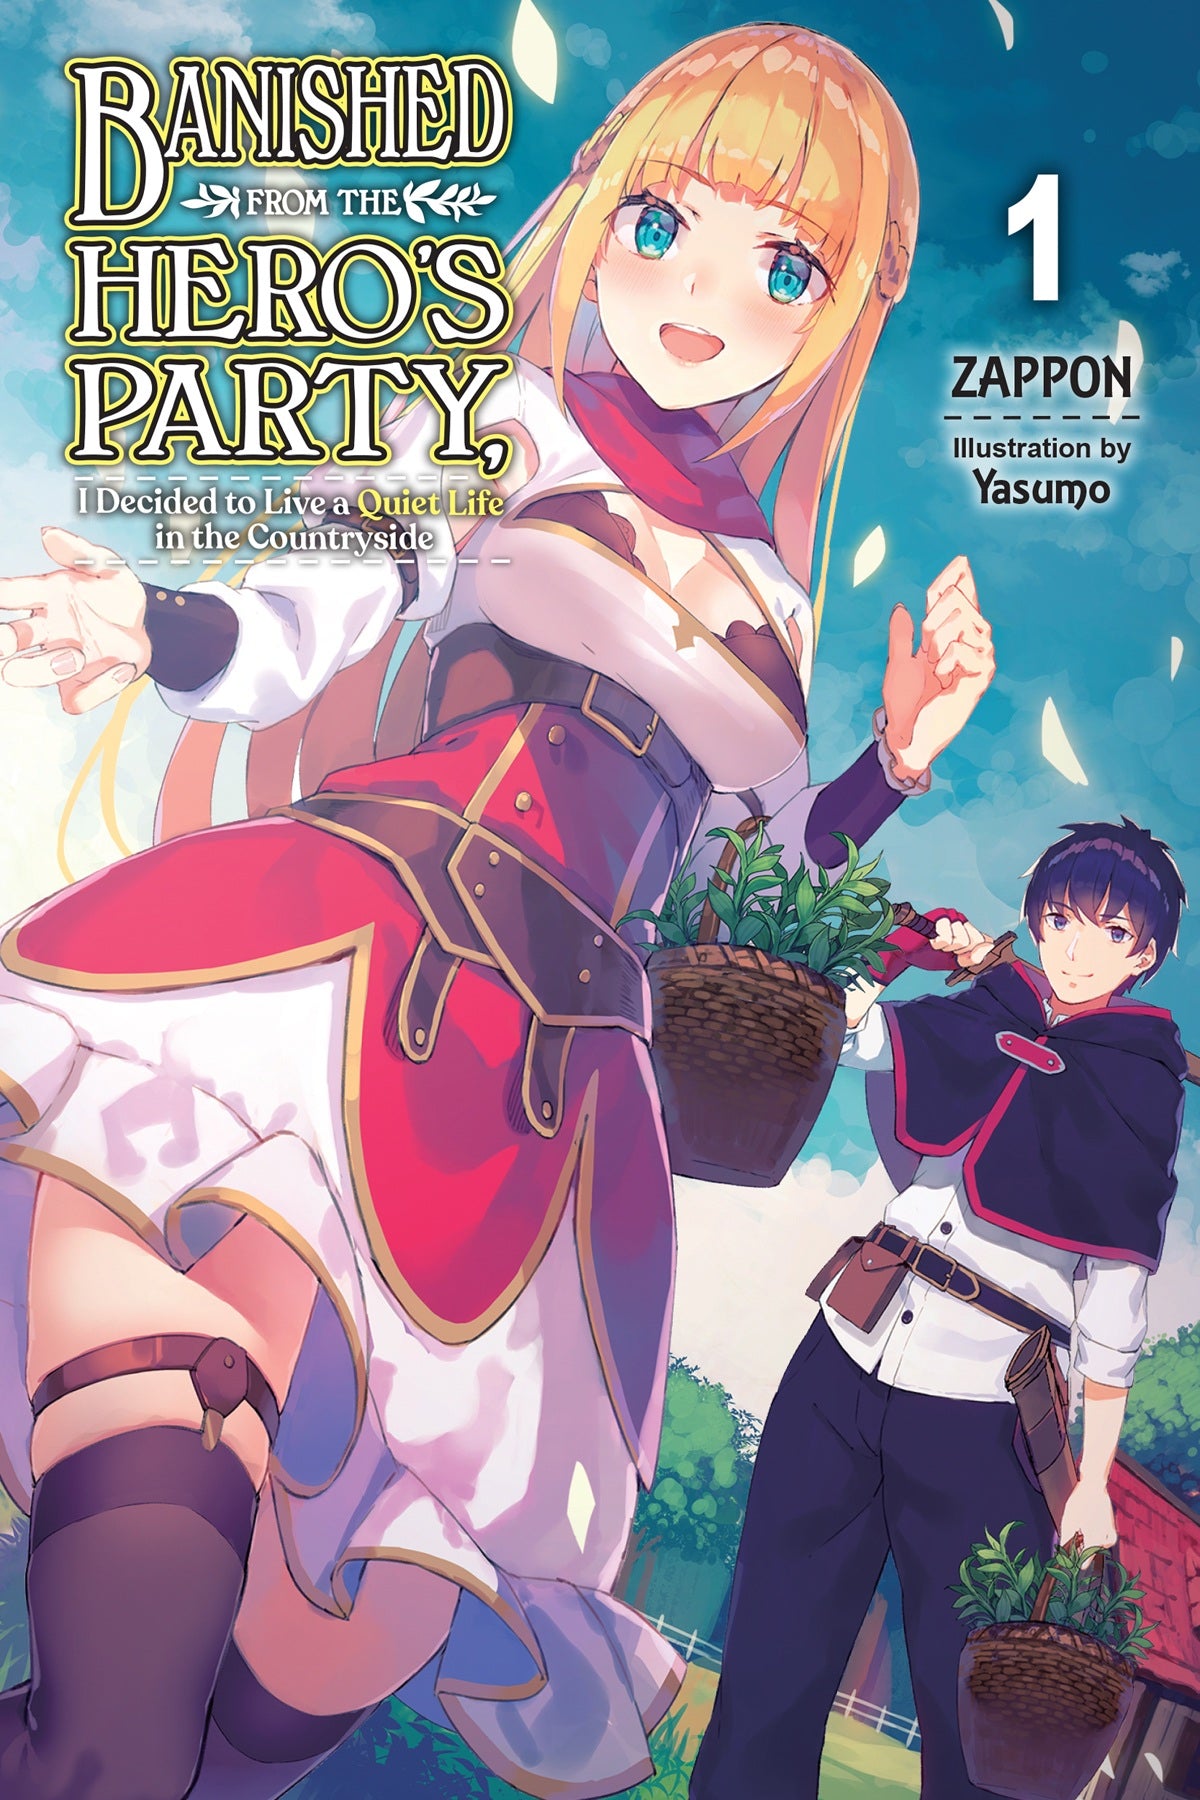 Banished from the Hero's Party, I Decided to Live a Quiet Life in the Countryside Vol. 01 (Light Novel)